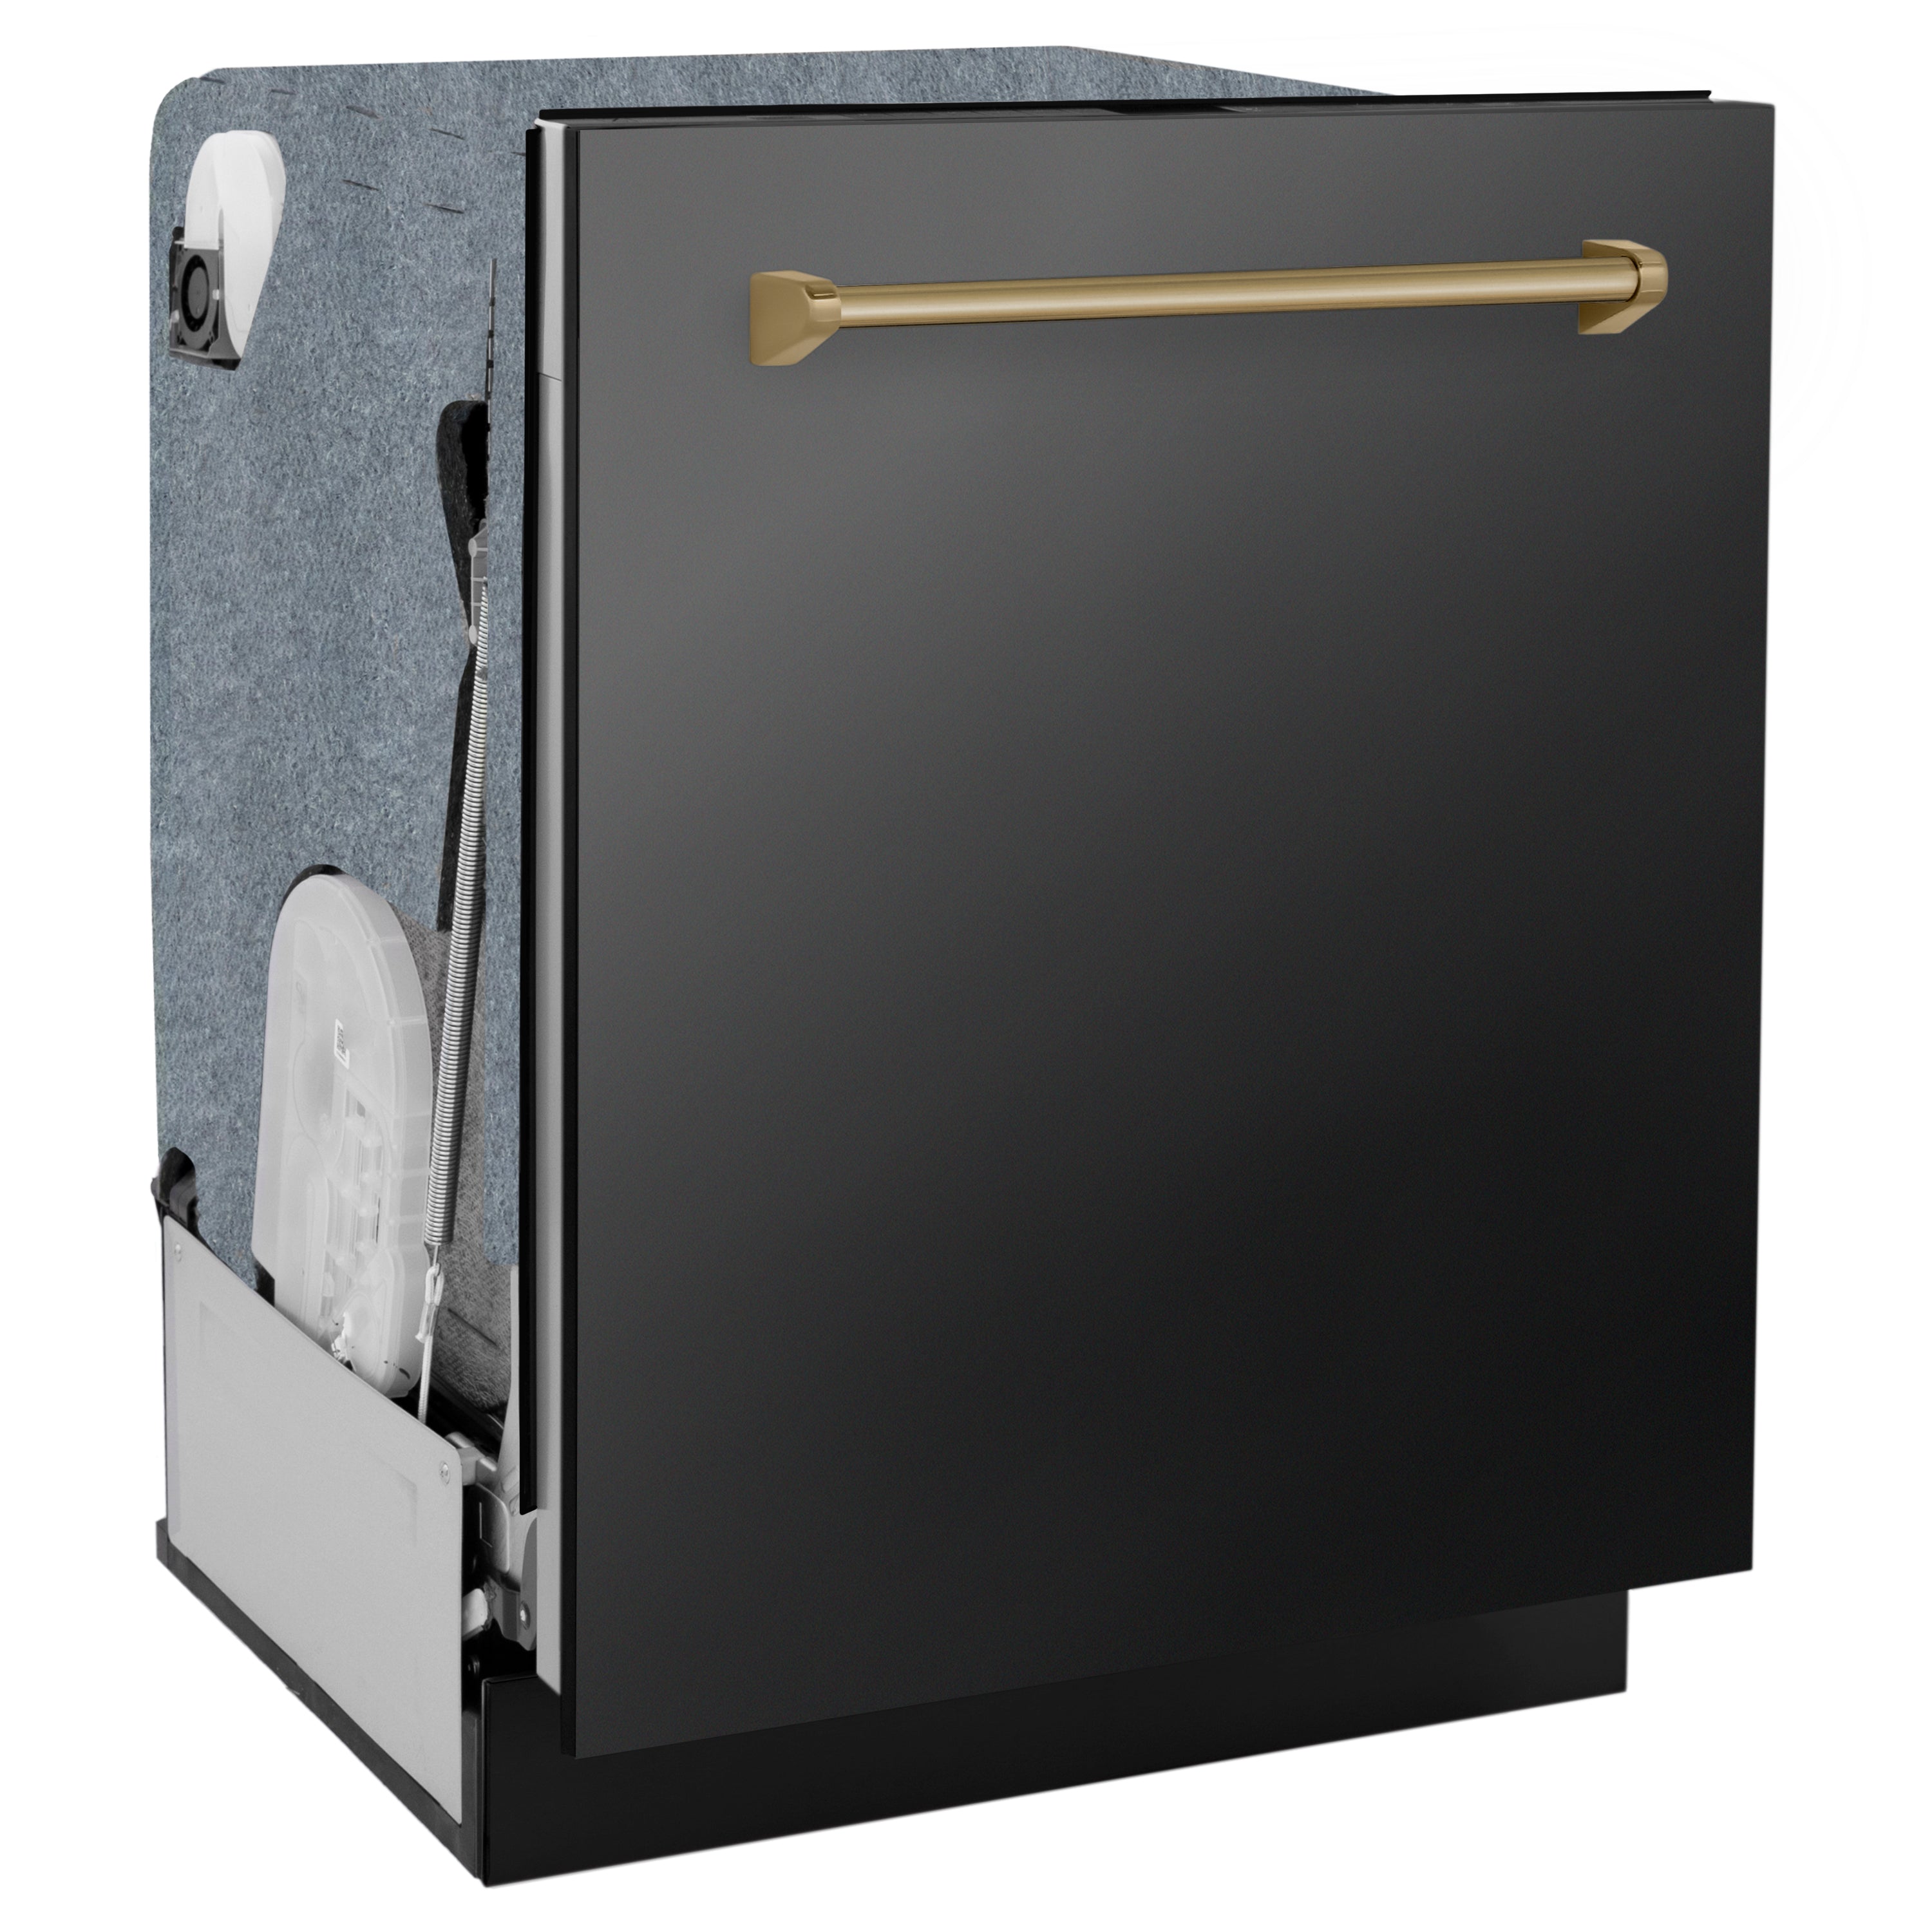 ZLINE Autograph Edition 24 in. Tall Tub Dishwasher with Black Stainless Steel Panel and Champagne Bronze Handle side.